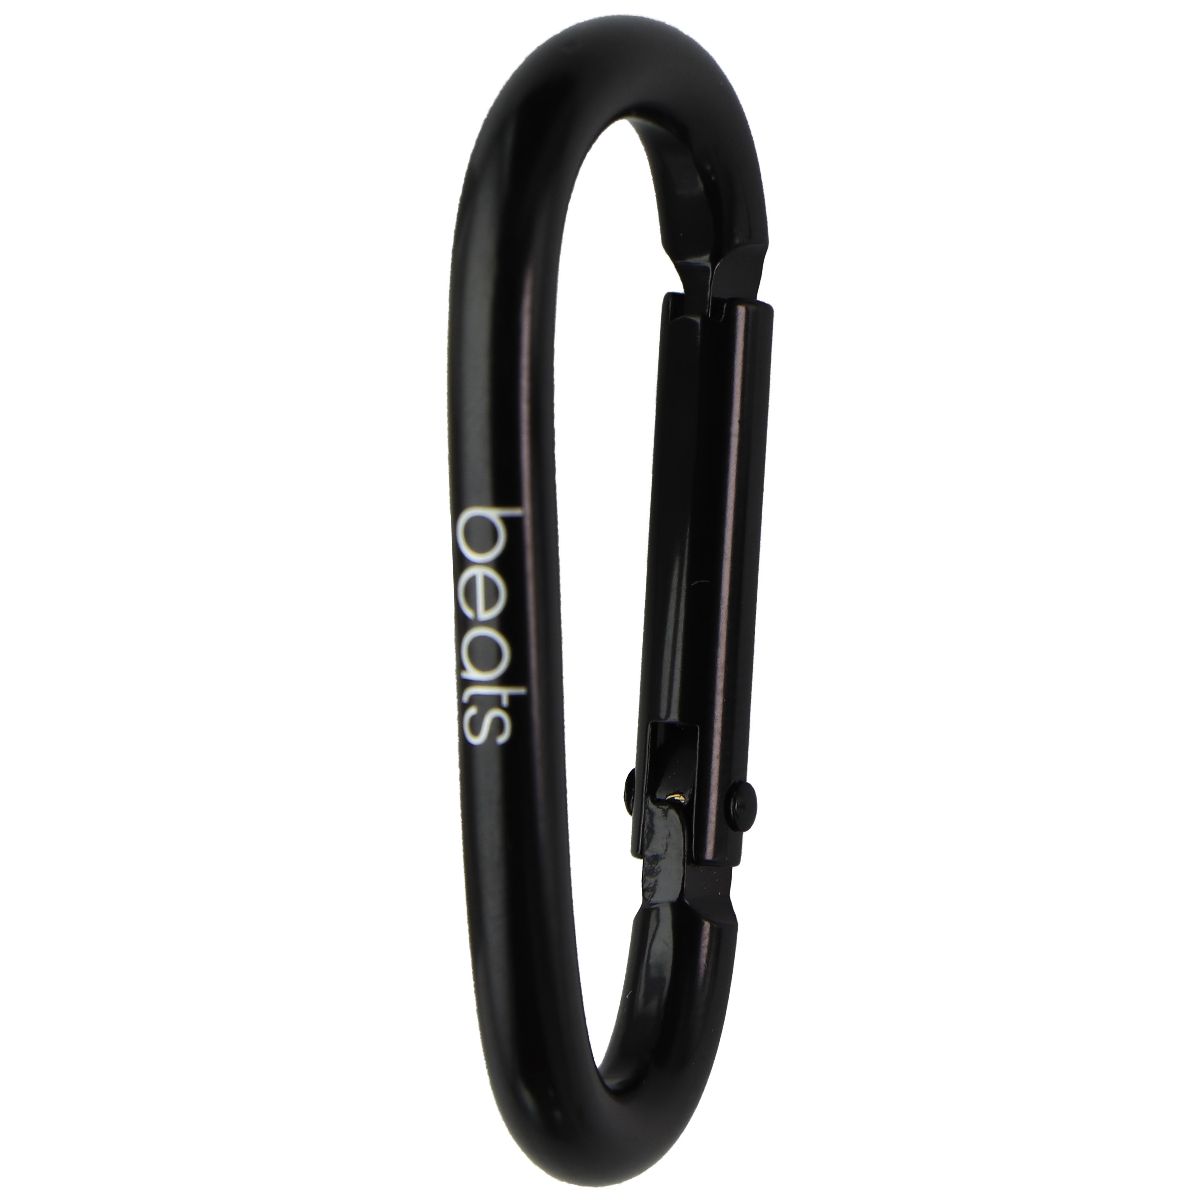 Beats by Dre OEM Carabiner Belt Hook D-ring Keychain - Black/White Logo Portable Audio - Headphones Beats by Dr. Dre    - Simple Cell Bulk Wholesale Pricing - USA Seller